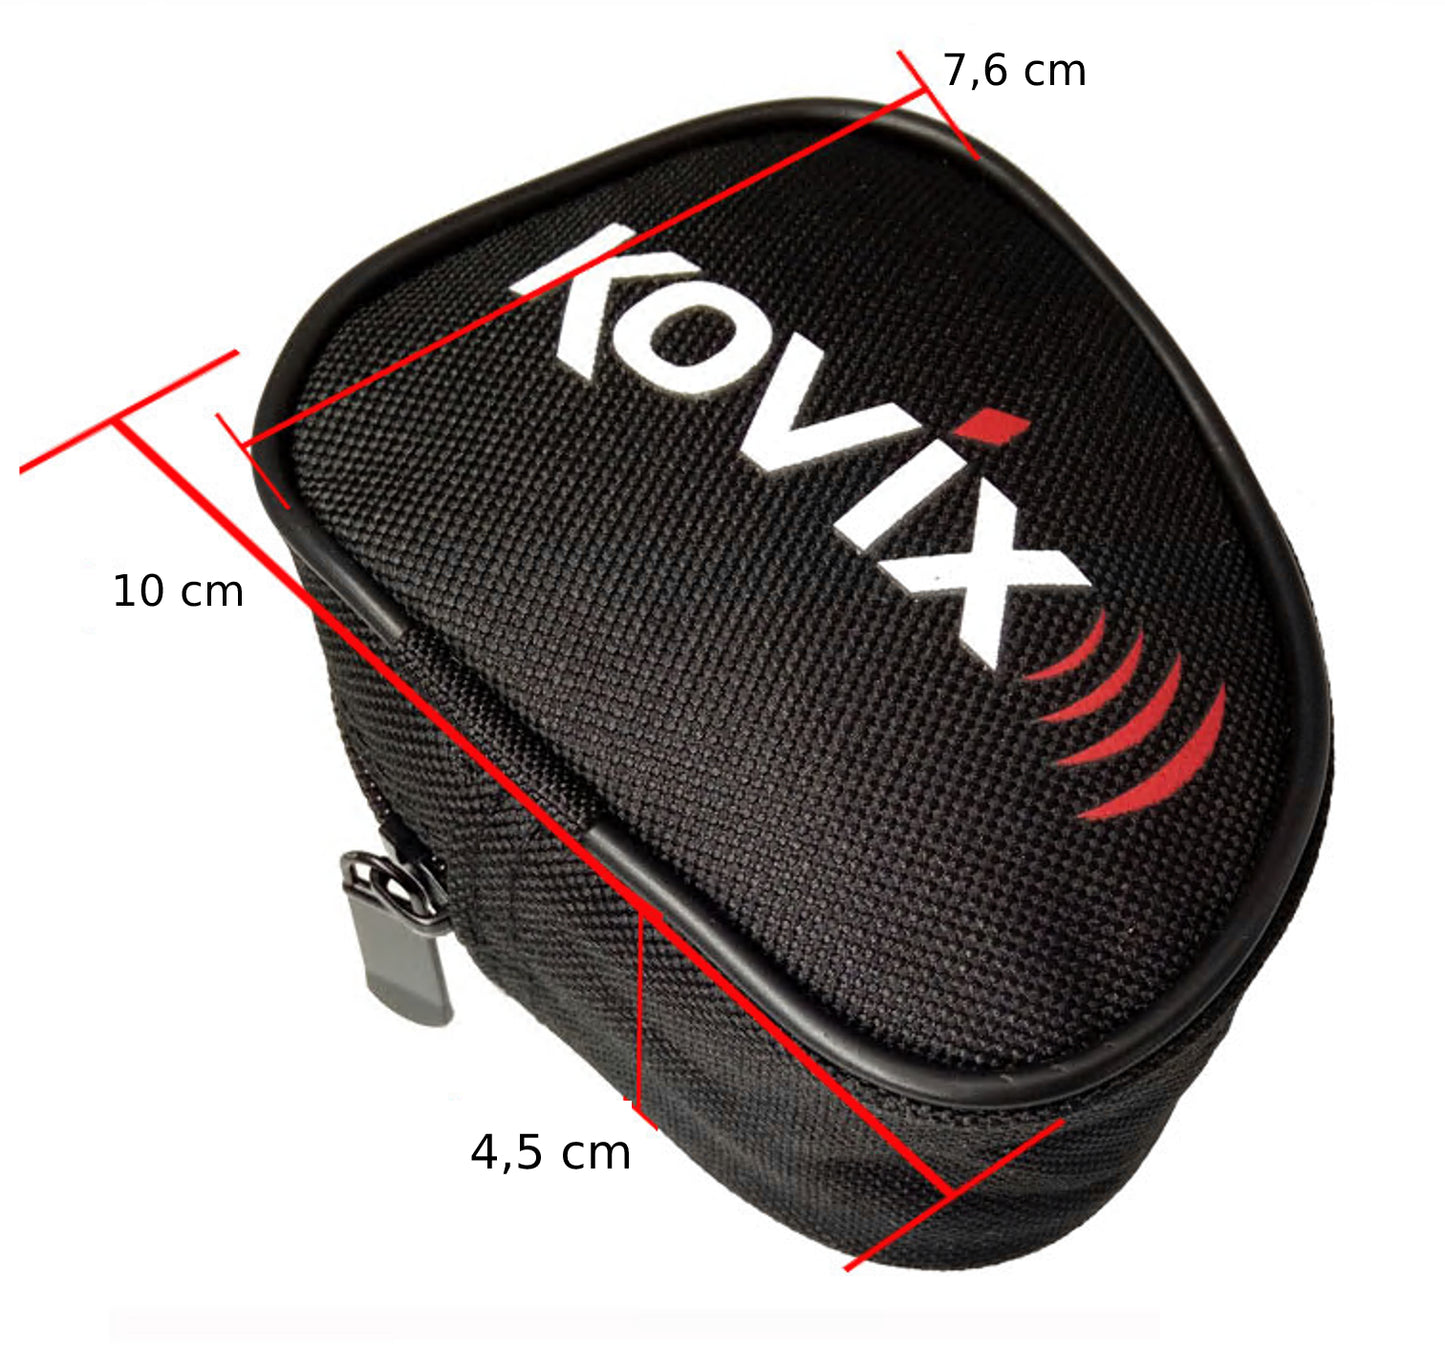 Kovix Carrying bag for disc and lever locks.